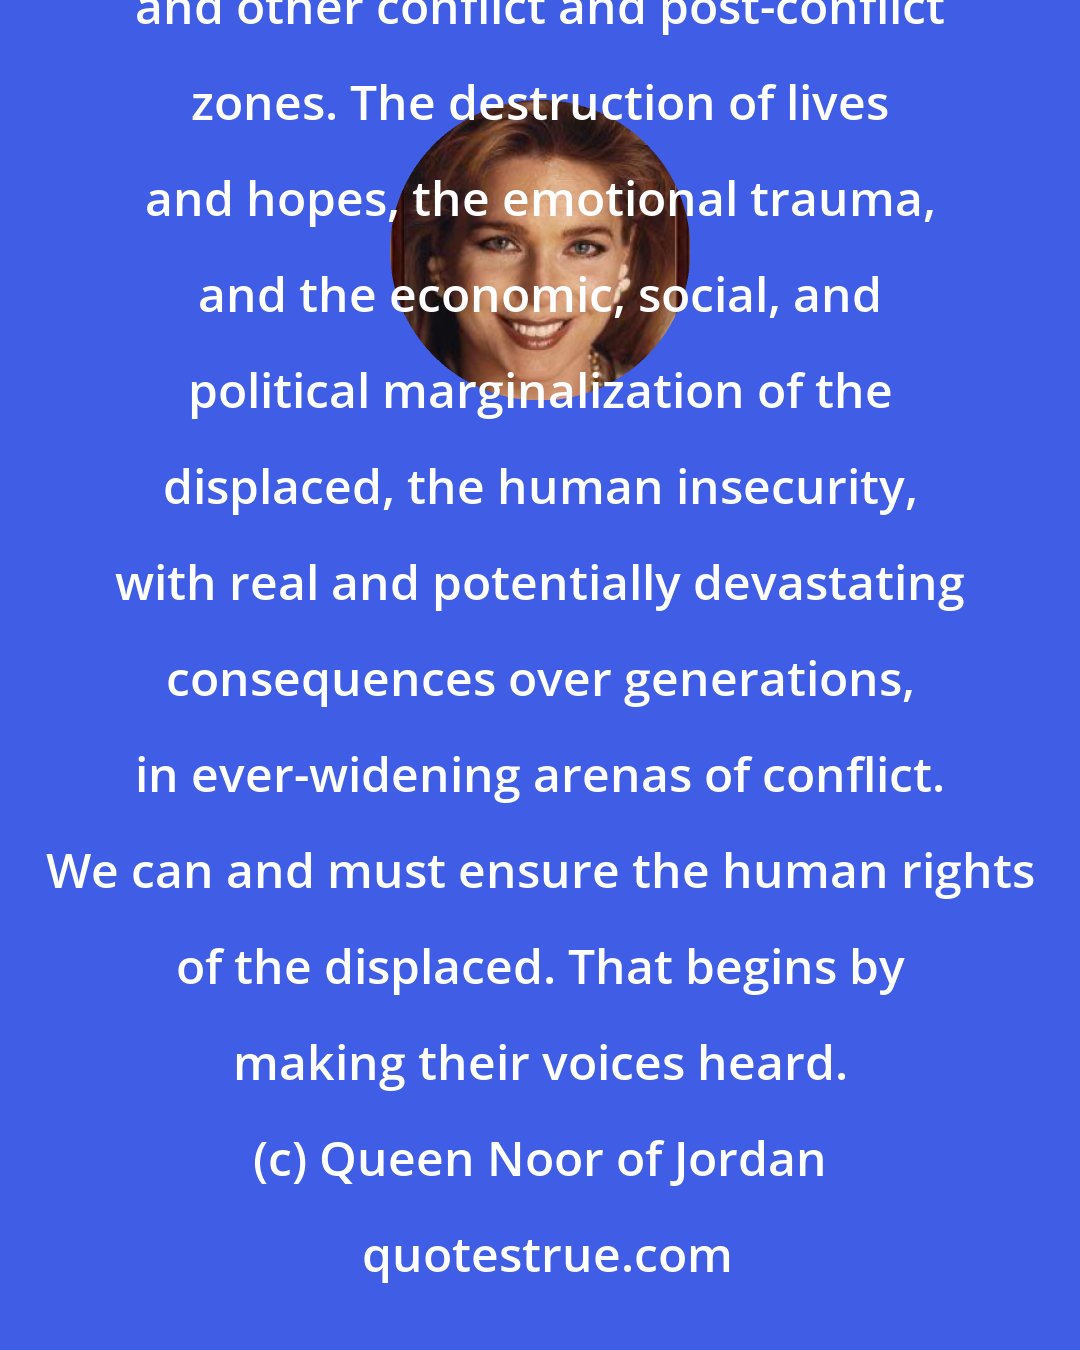 Queen Noor of Jordan: I have witnessed firsthand the anguish of this humanitarian tragedy - in Palestine, Iraq, Syria, Pakistan, and other conflict and post-conflict zones. The destruction of lives and hopes, the emotional trauma, and the economic, social, and political marginalization of the displaced, the human insecurity, with real and potentially devastating consequences over generations, in ever-widening arenas of conflict. We can and must ensure the human rights of the displaced. That begins by making their voices heard.